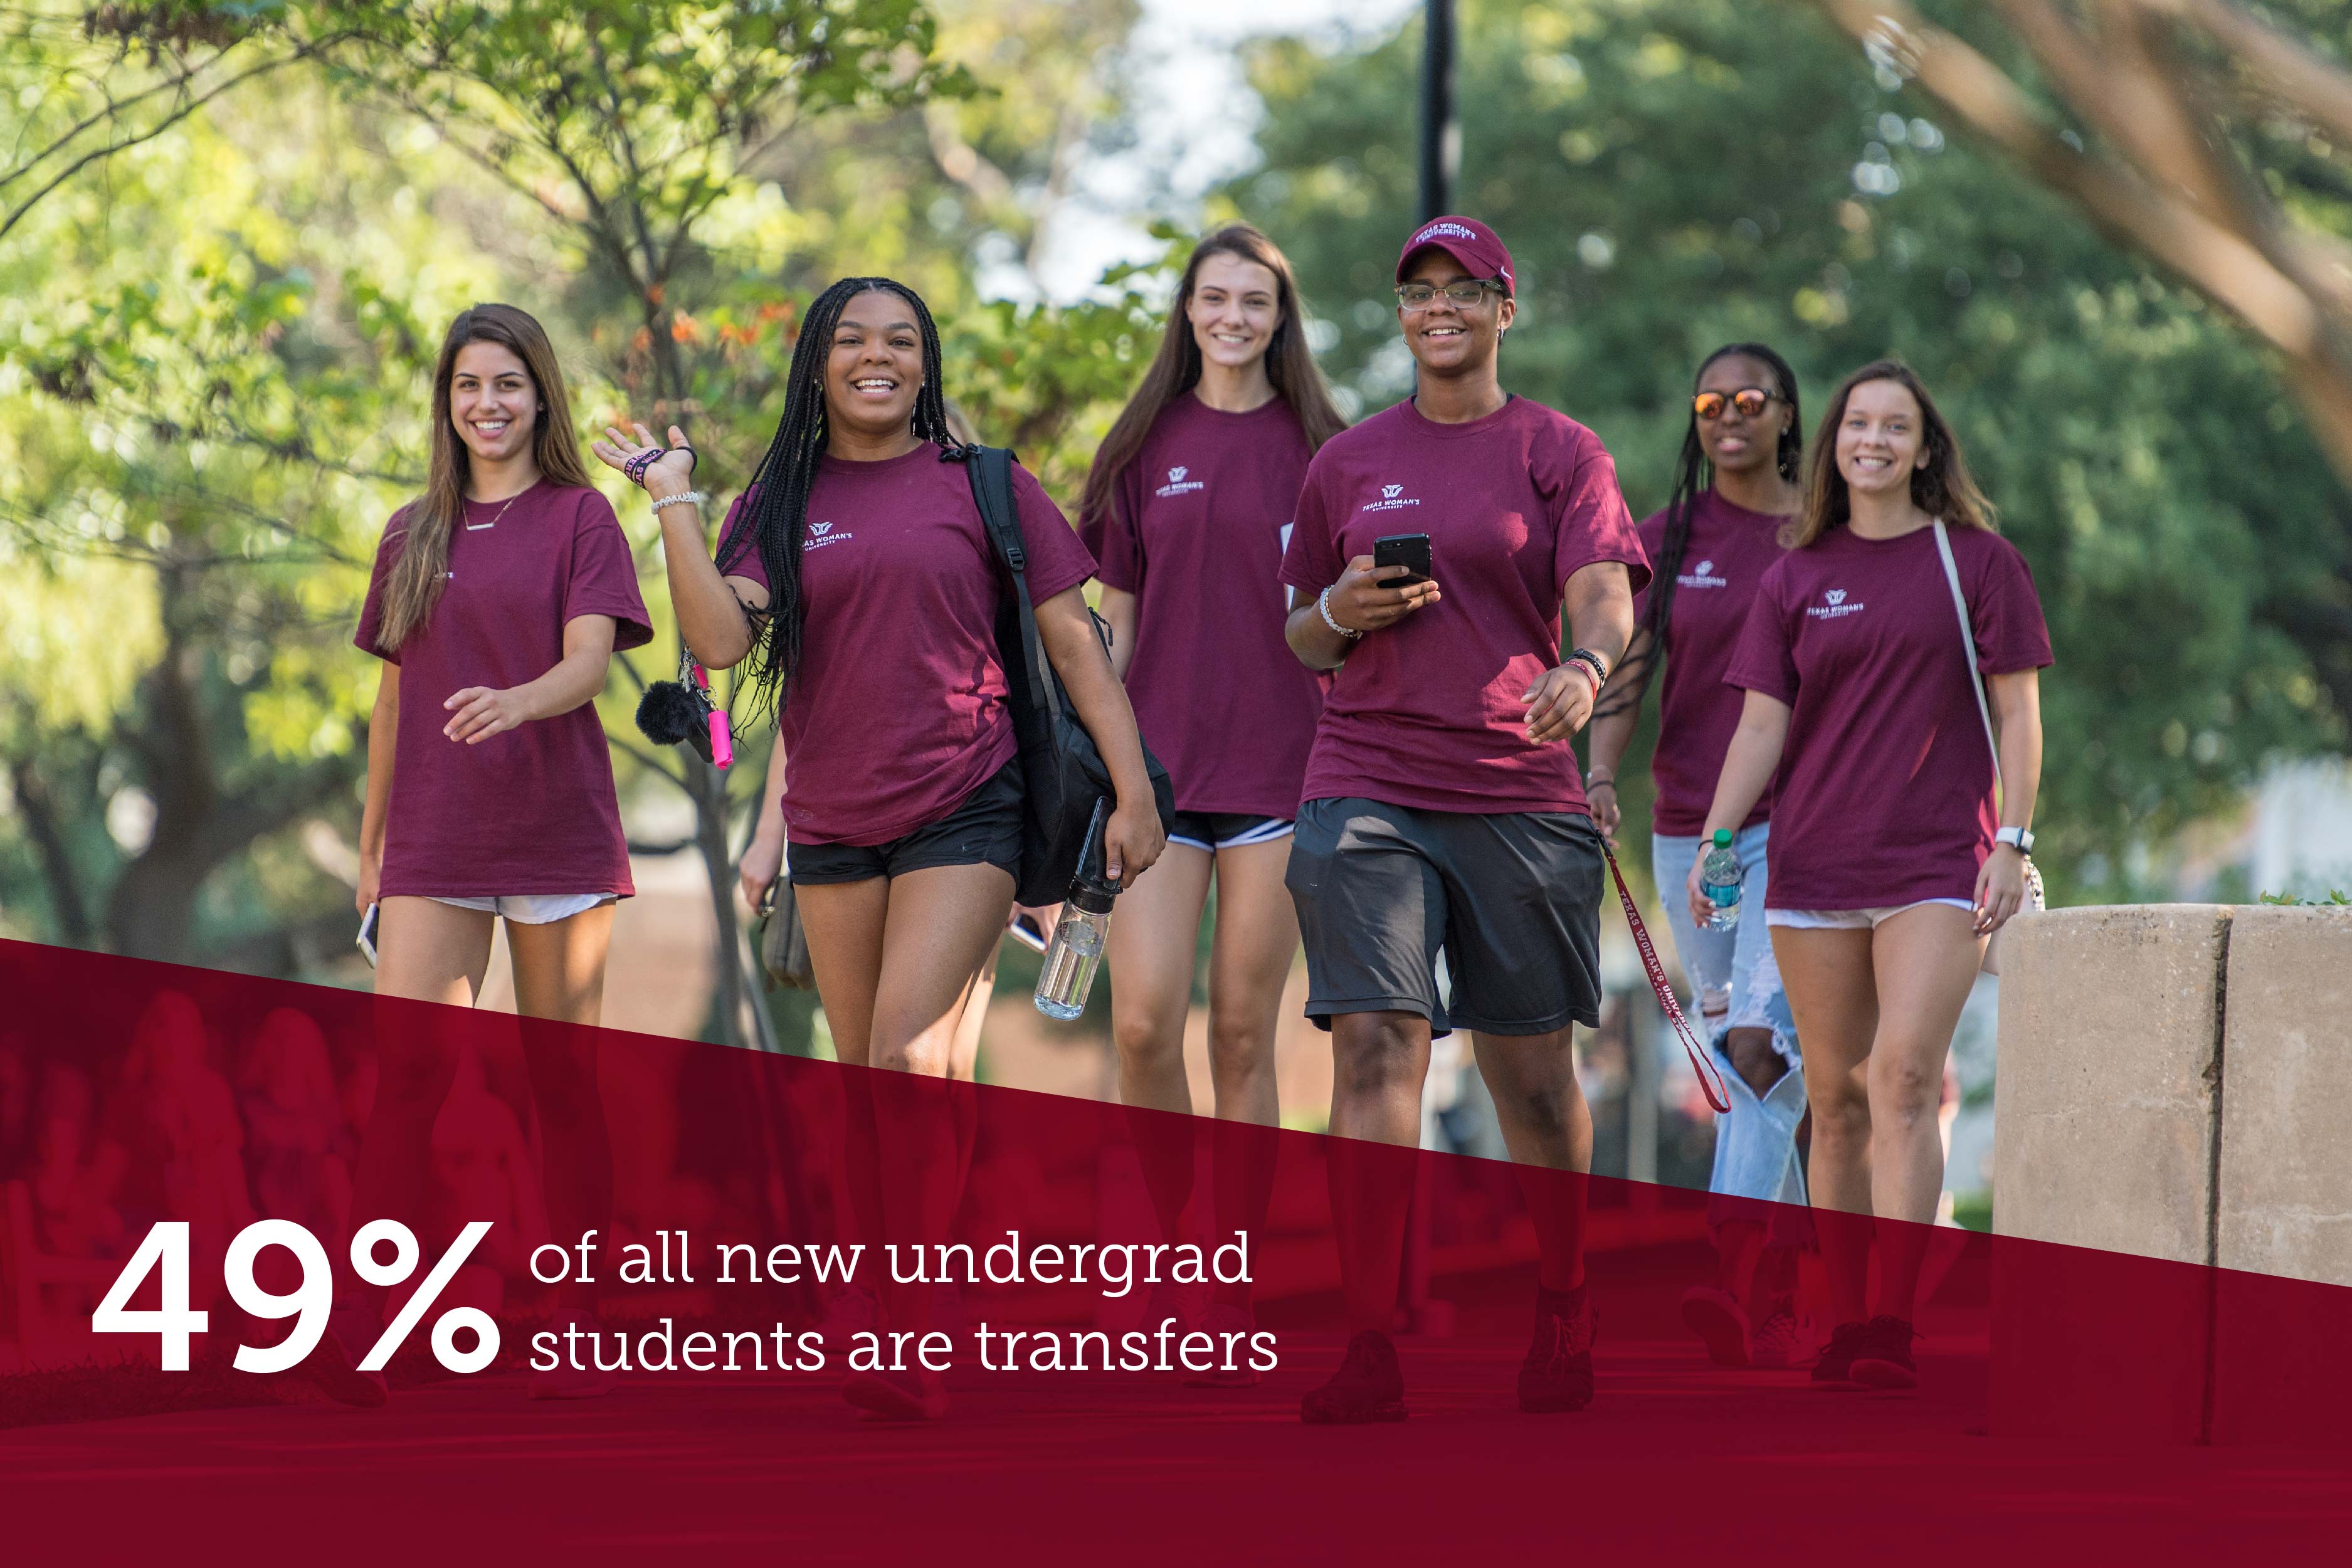 A group of TWU transfer students walk across campus with the university fact "49% of all new undergrads are transfers" displayed below them.